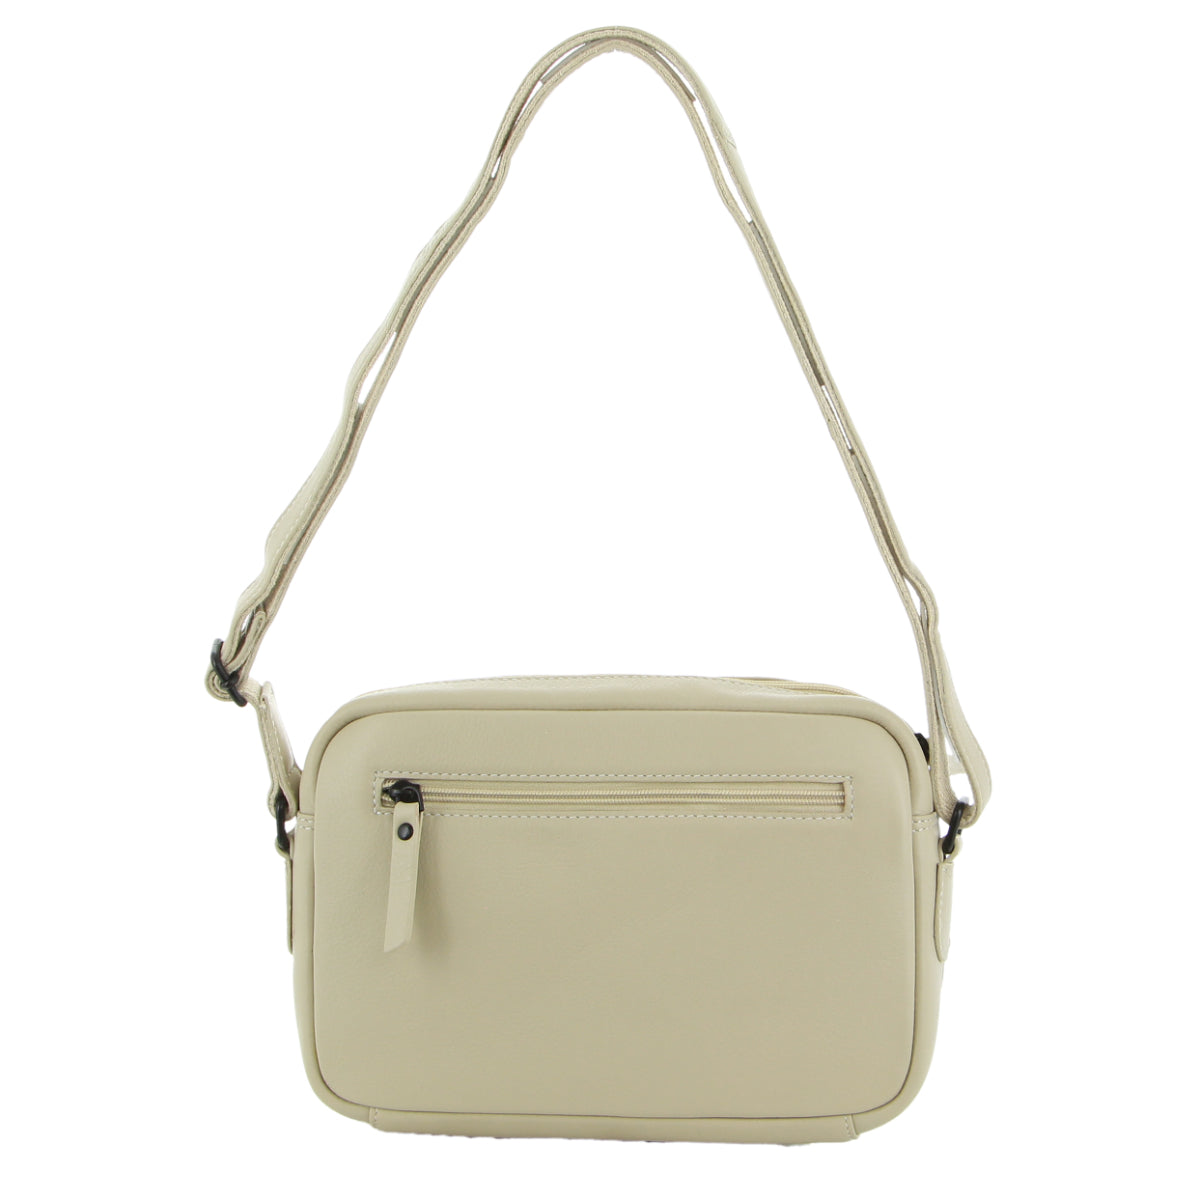 Milleni - NL3871 Small leather sidebag - Cement-1